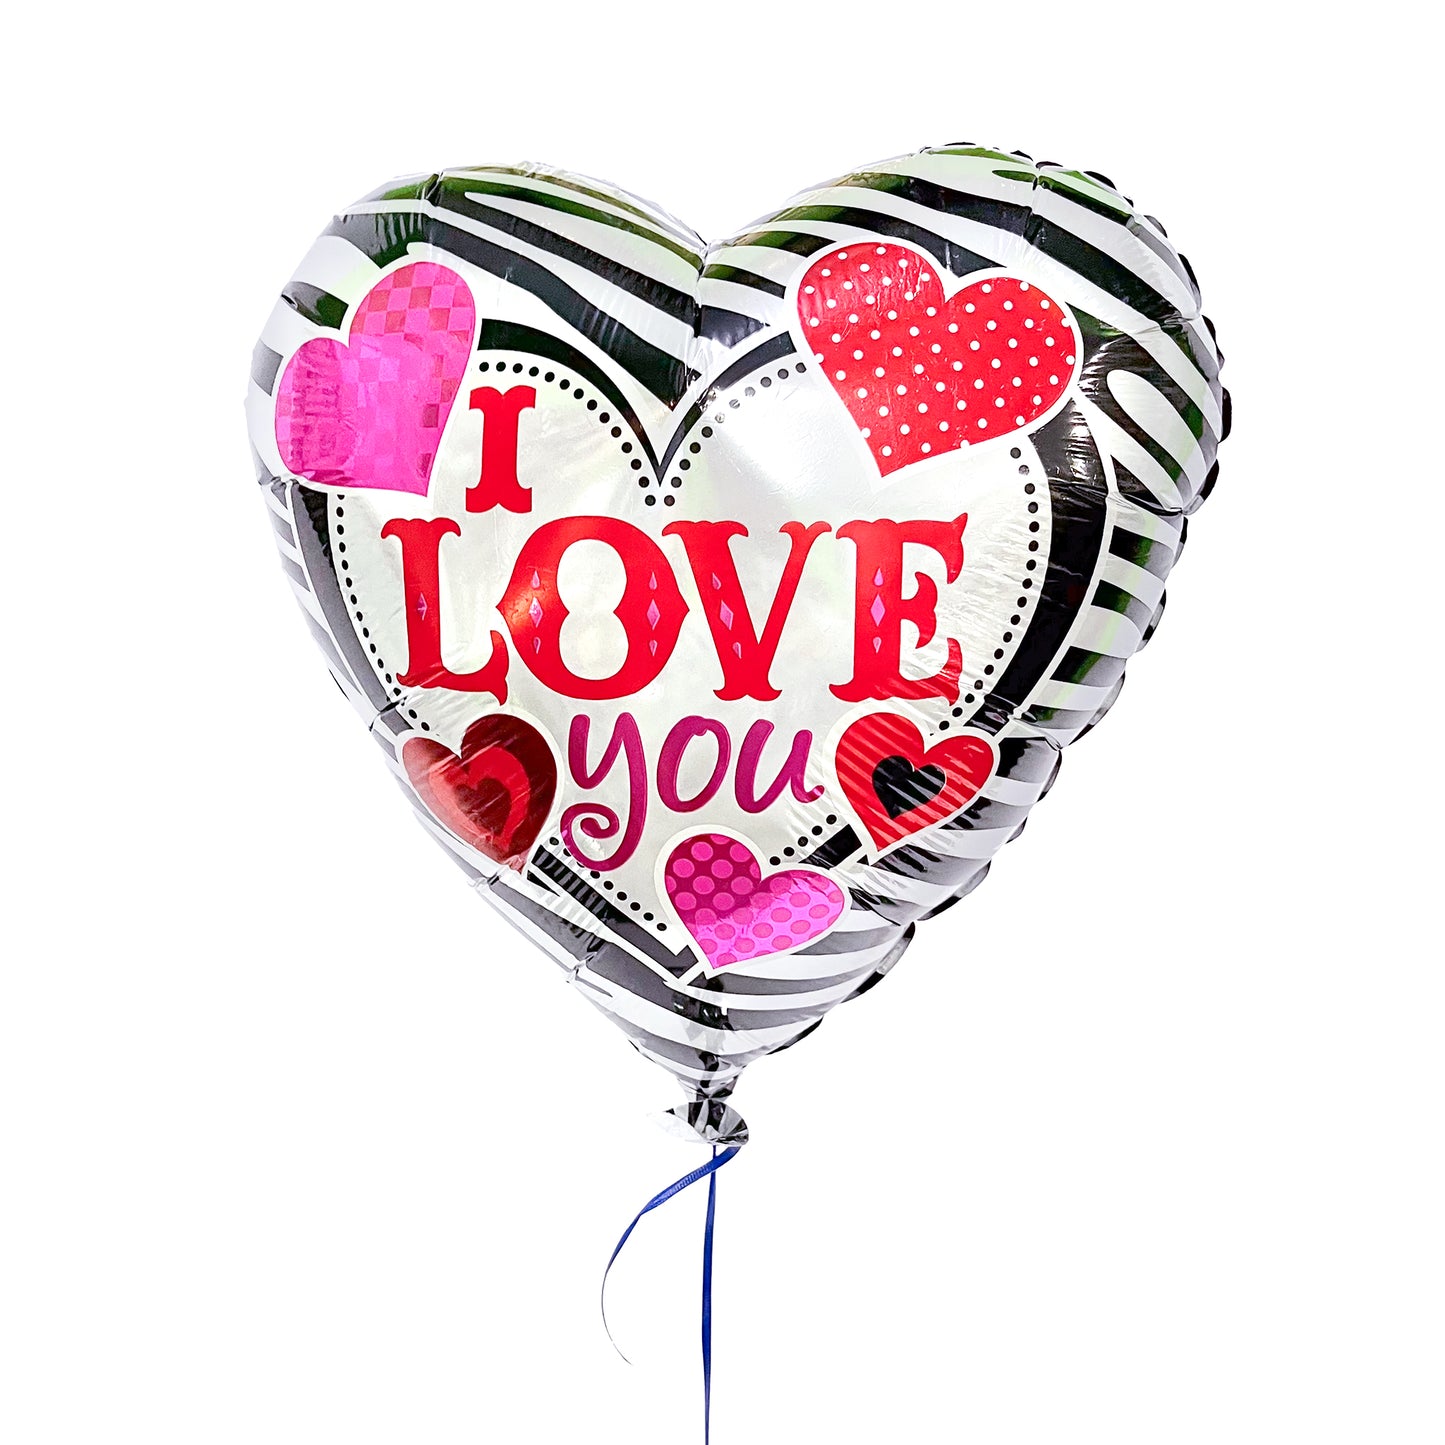 I love you — pink and red hearts on black and white striped heart-shaped mylar-balloon